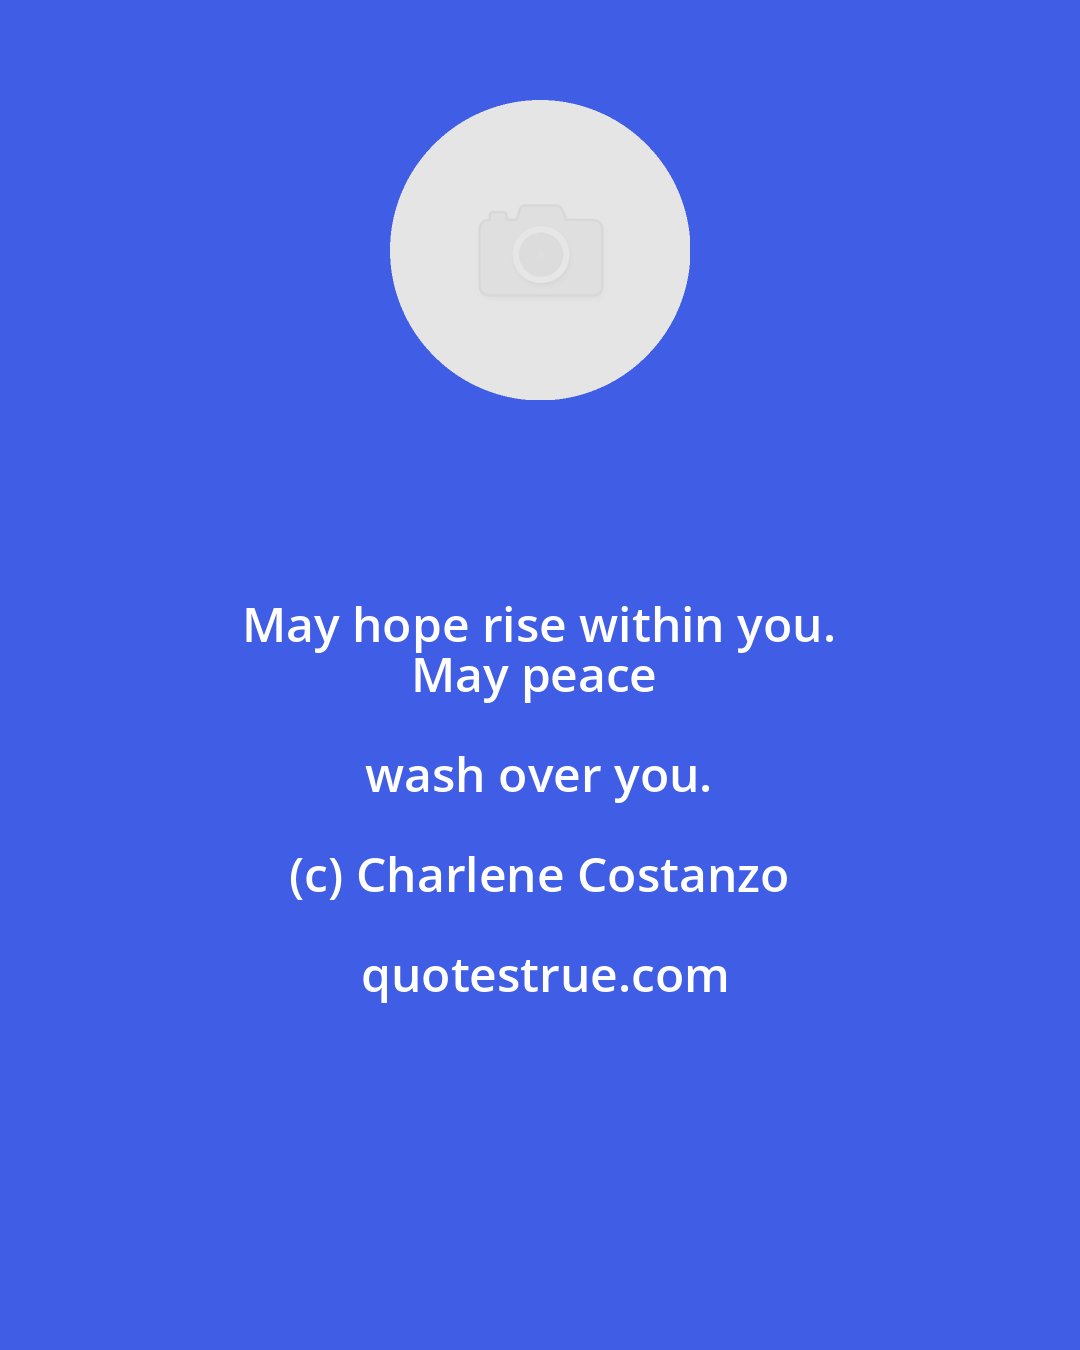 Charlene Costanzo: May hope rise within you. 
May peace wash over you.